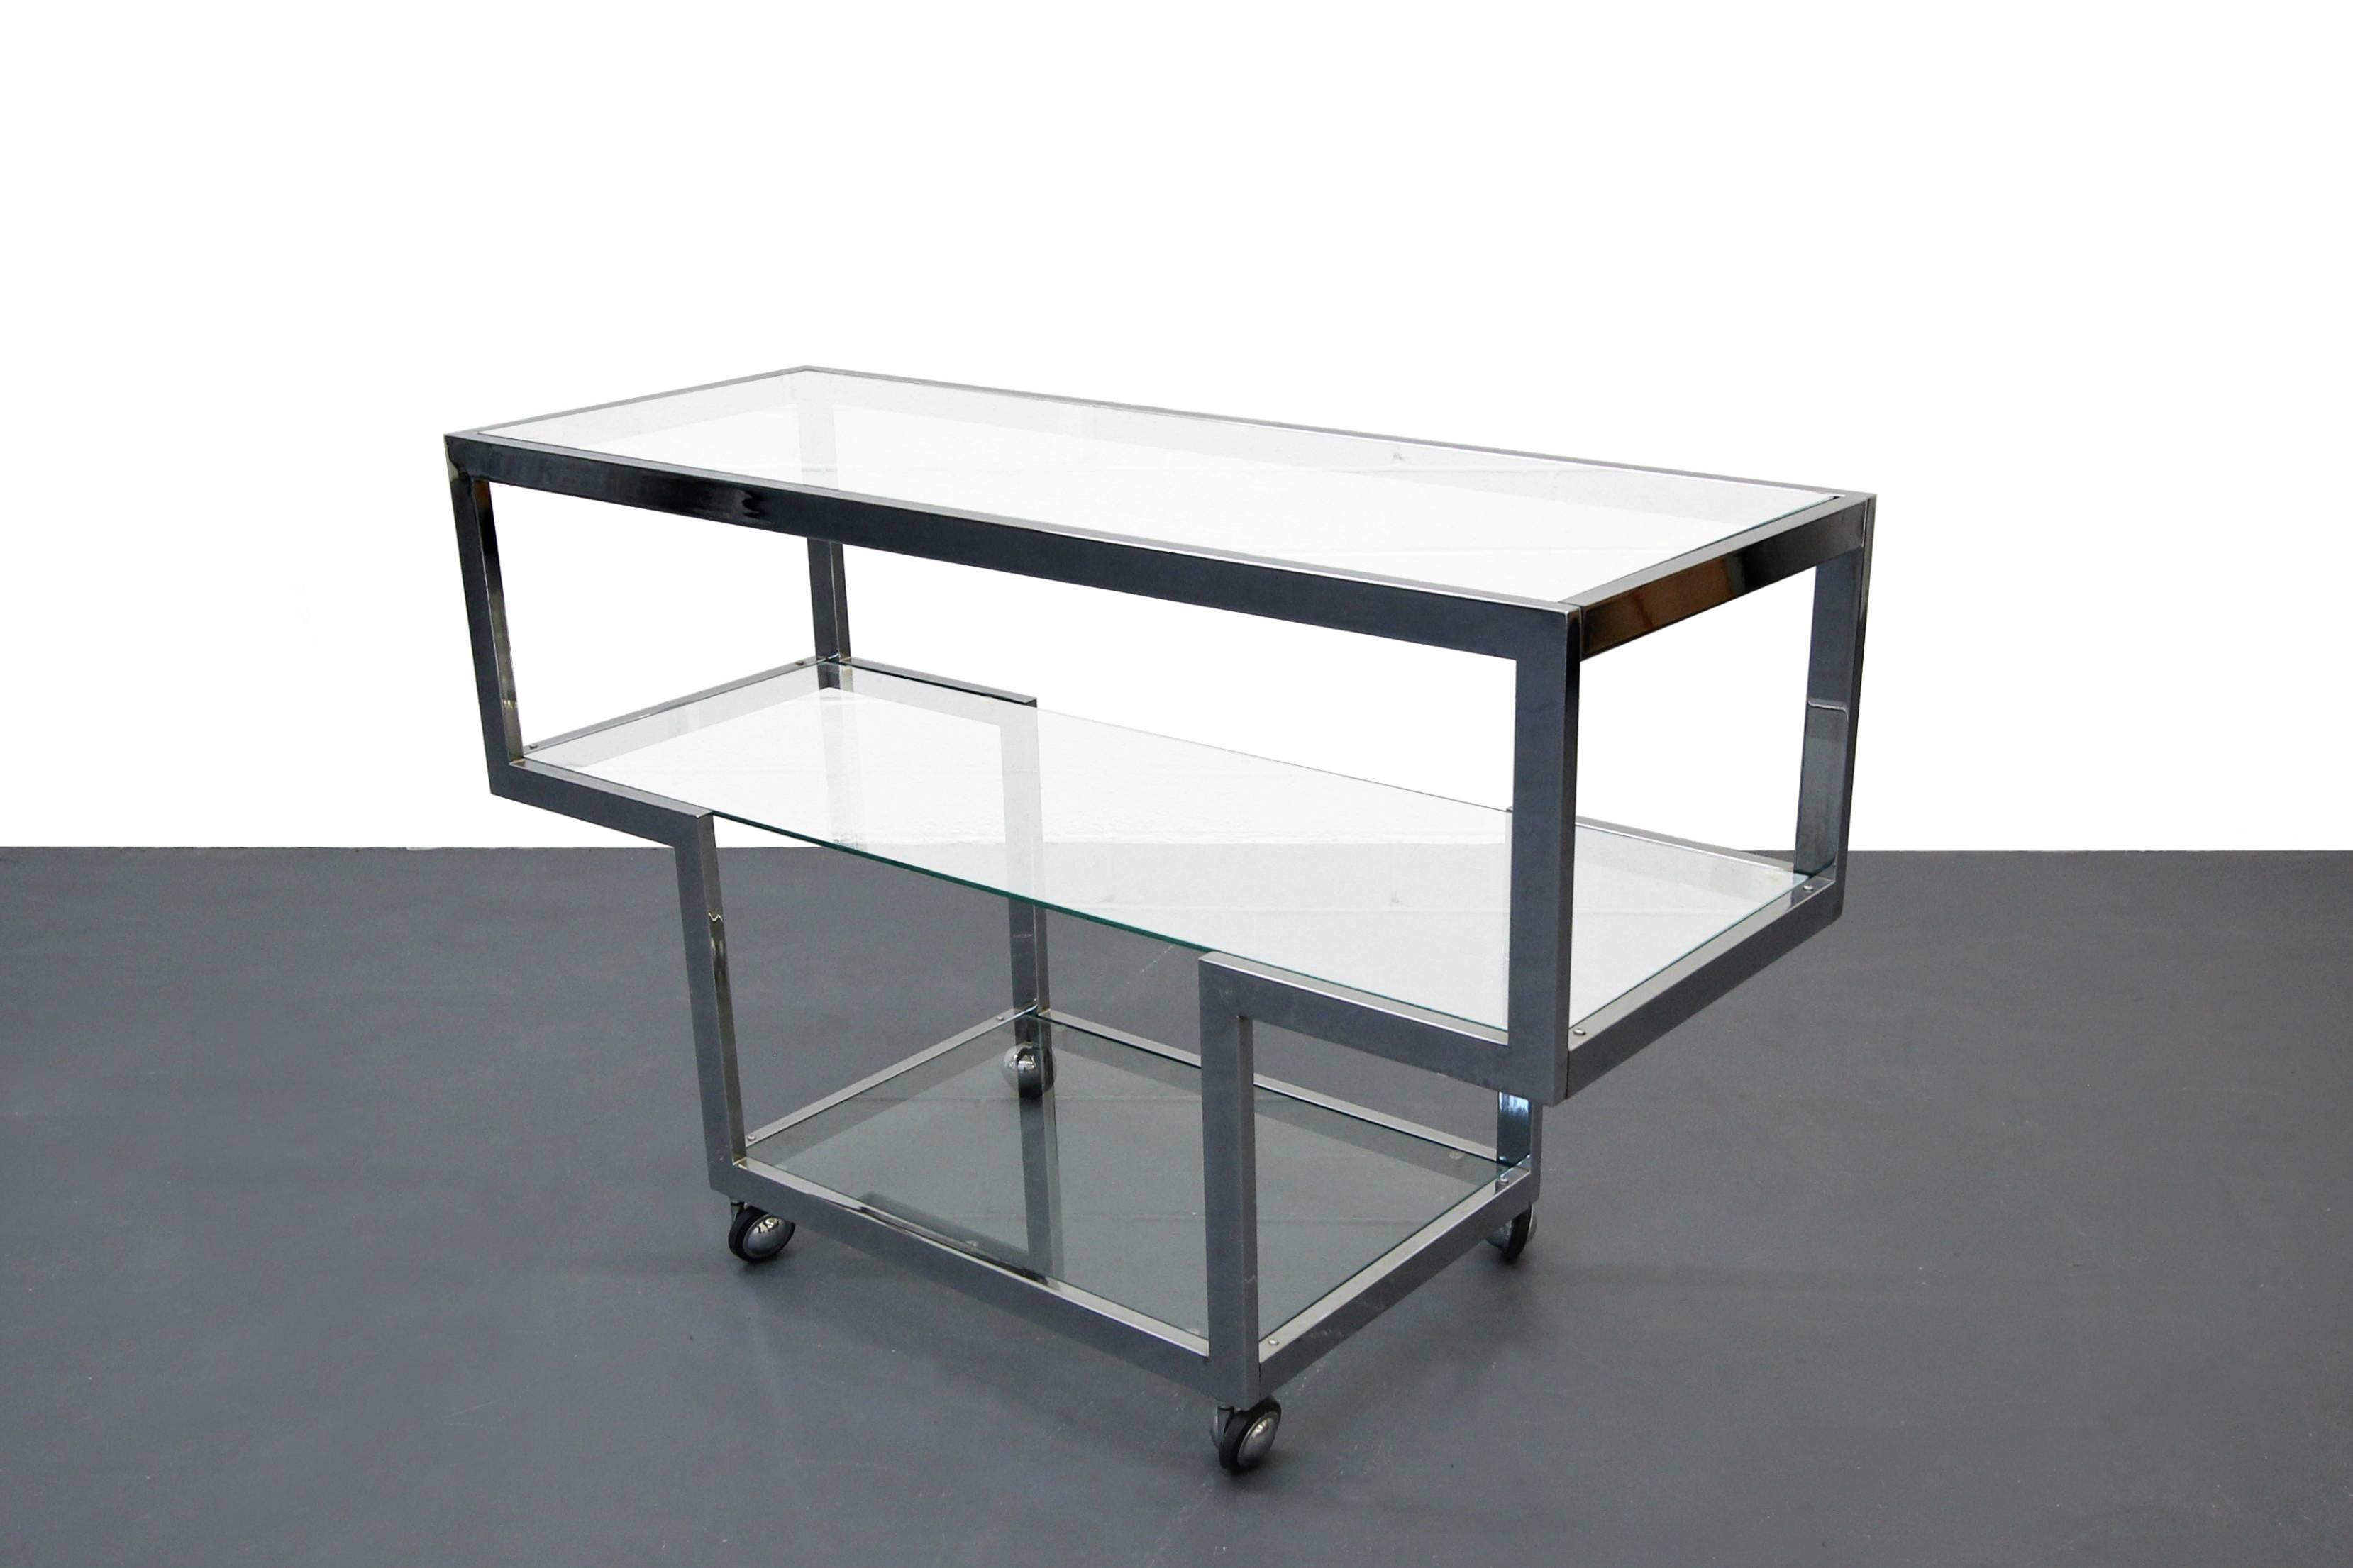 Simplistic yet sophisticated chrome and glass Mid-Century bar cart by Milo Baughman. The transparency of this piece makes it perfect in most any space. With three tiers of glass shelving for all your display and storage needs.

Cart is in excellent